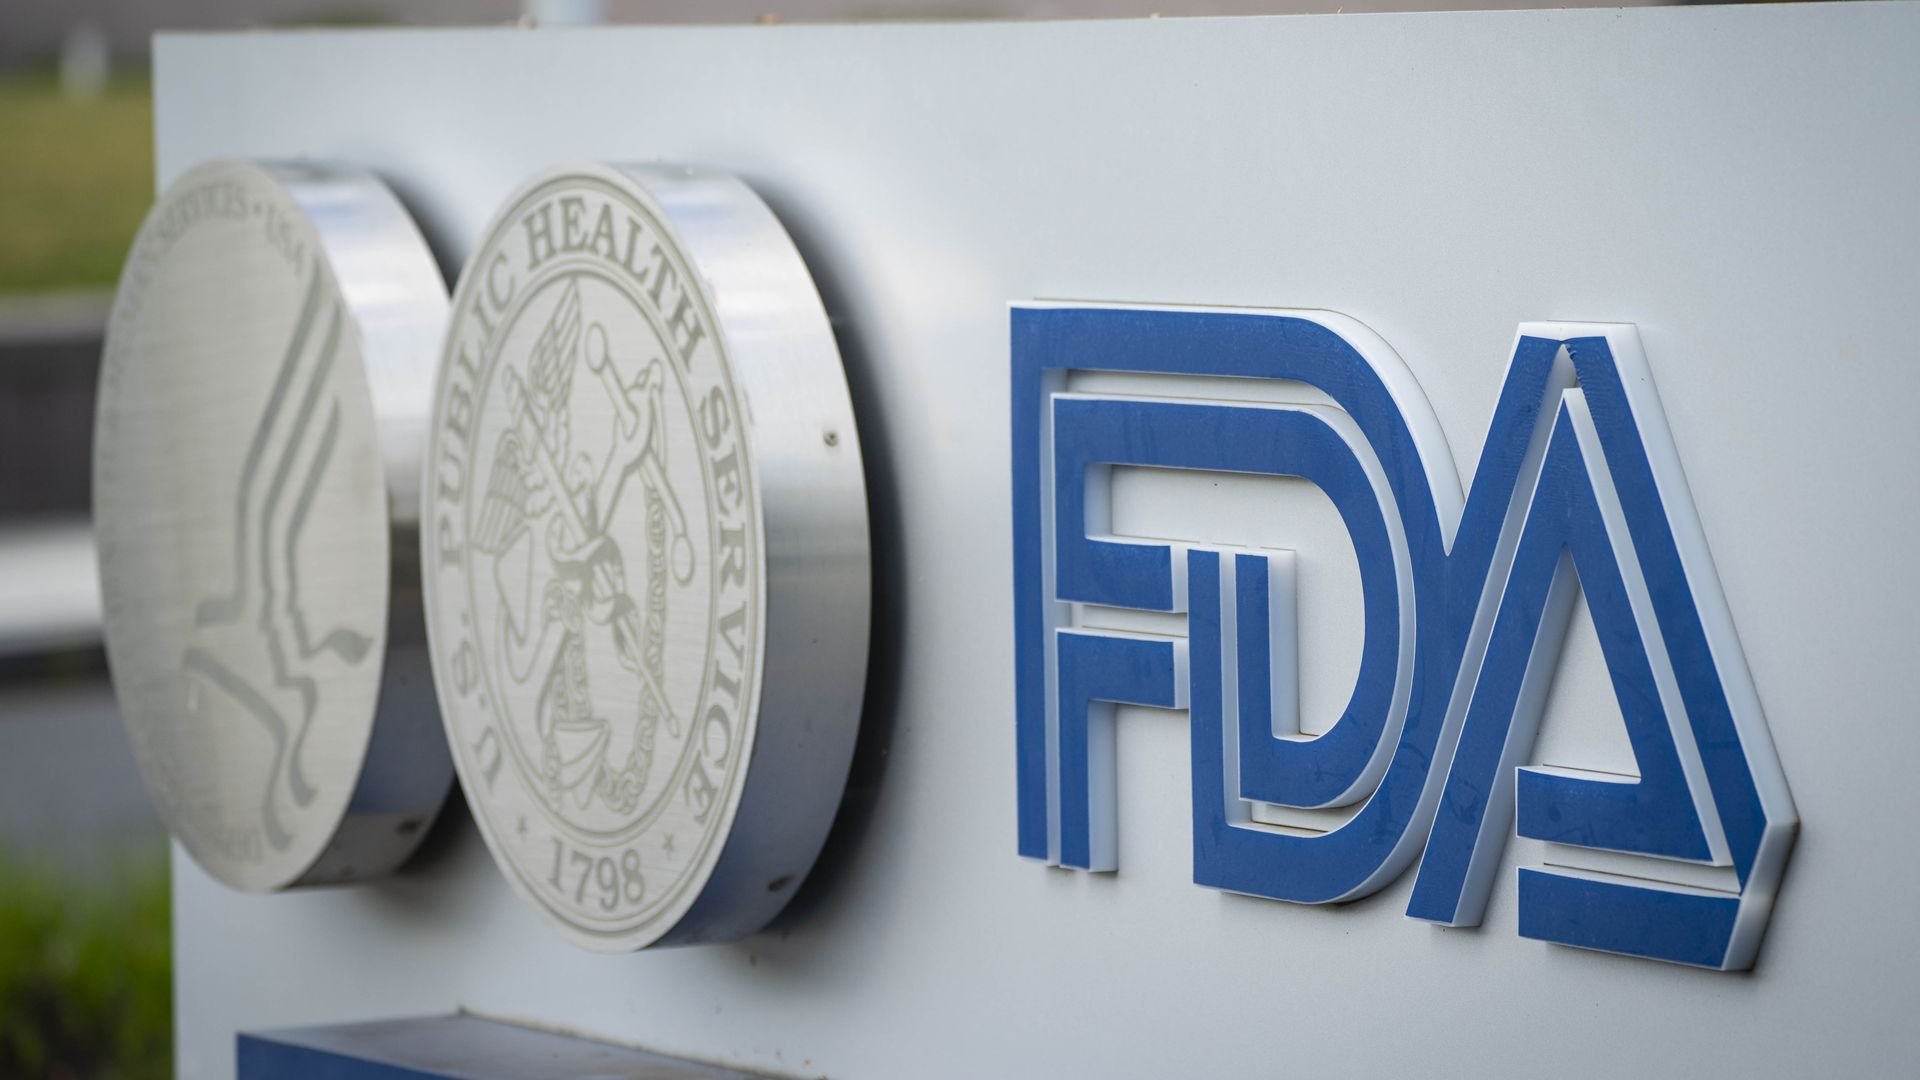 Top FDA officials thought scant evidence was enough to approve Alzheimer's drug